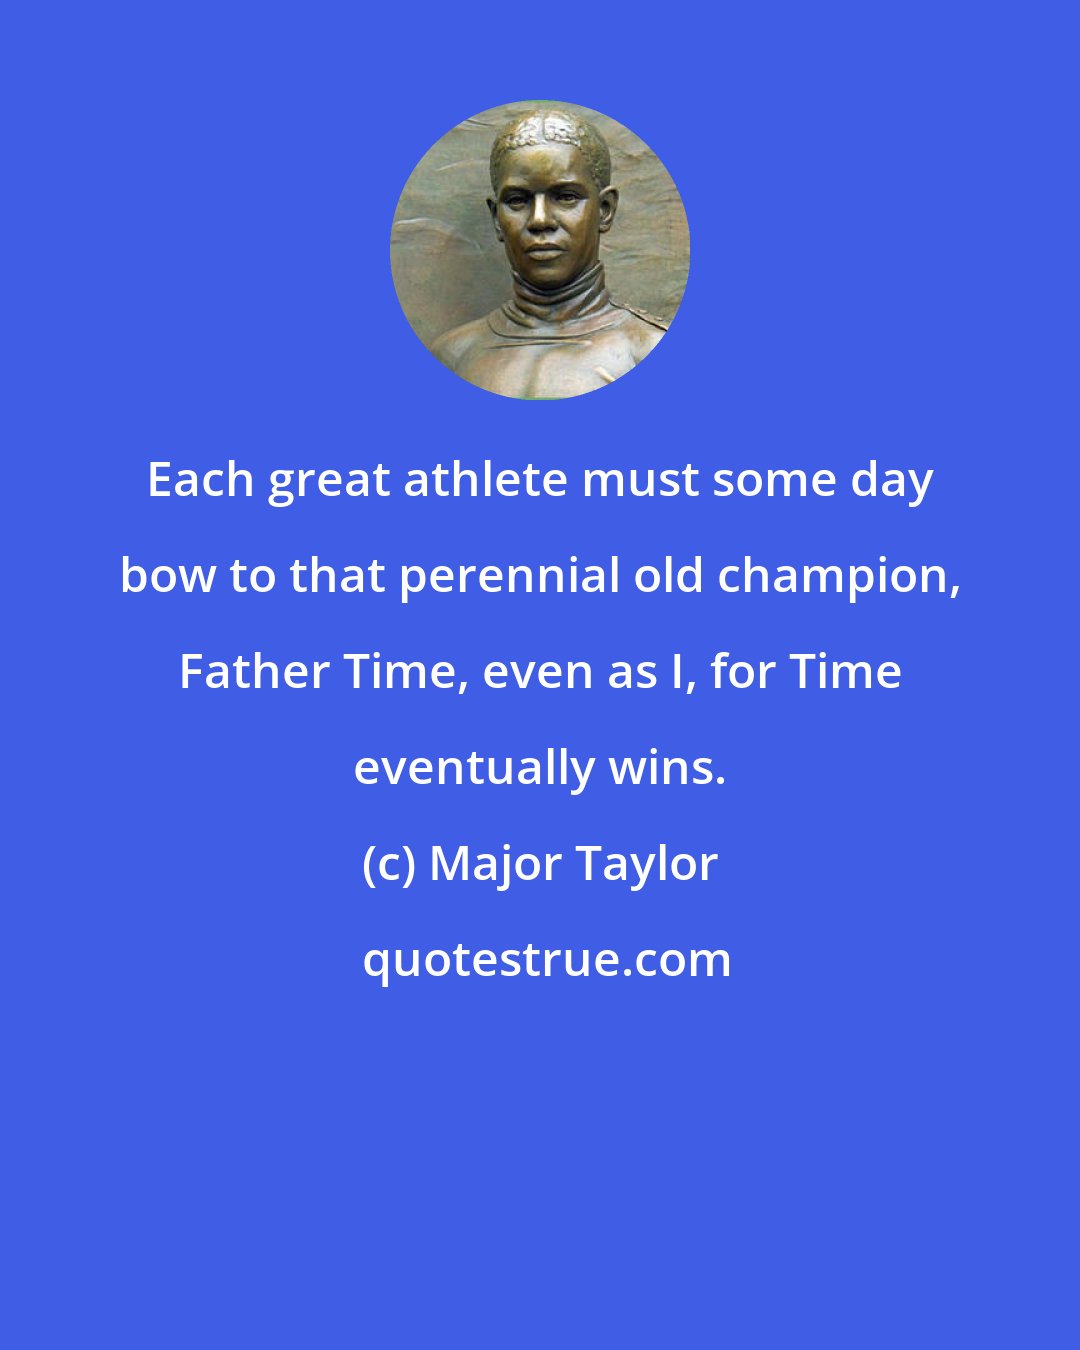 Major Taylor: Each great athlete must some day bow to that perennial old champion, Father Time, even as I, for Time eventually wins.